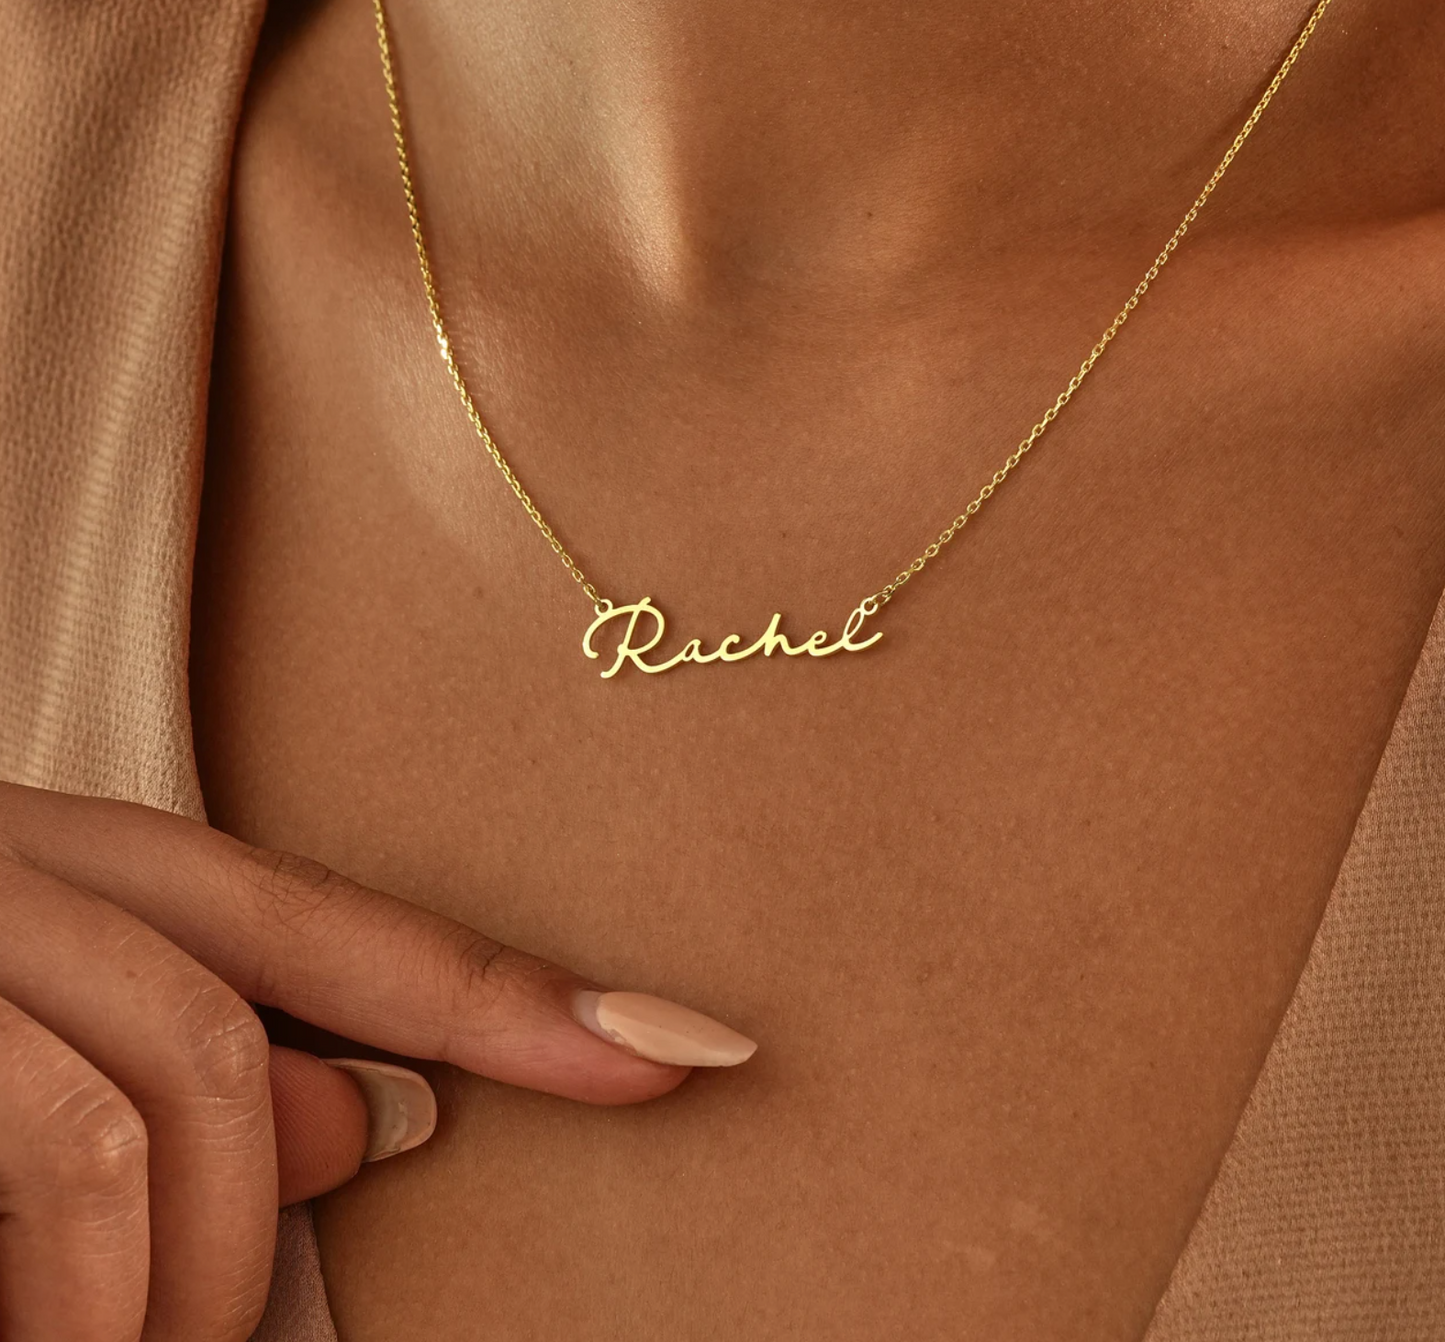 Personalized Name Necklace • Gold Name Necklace with Chain • Perfect Gift for Her • Personalized Gift • 925 Sterling Silver